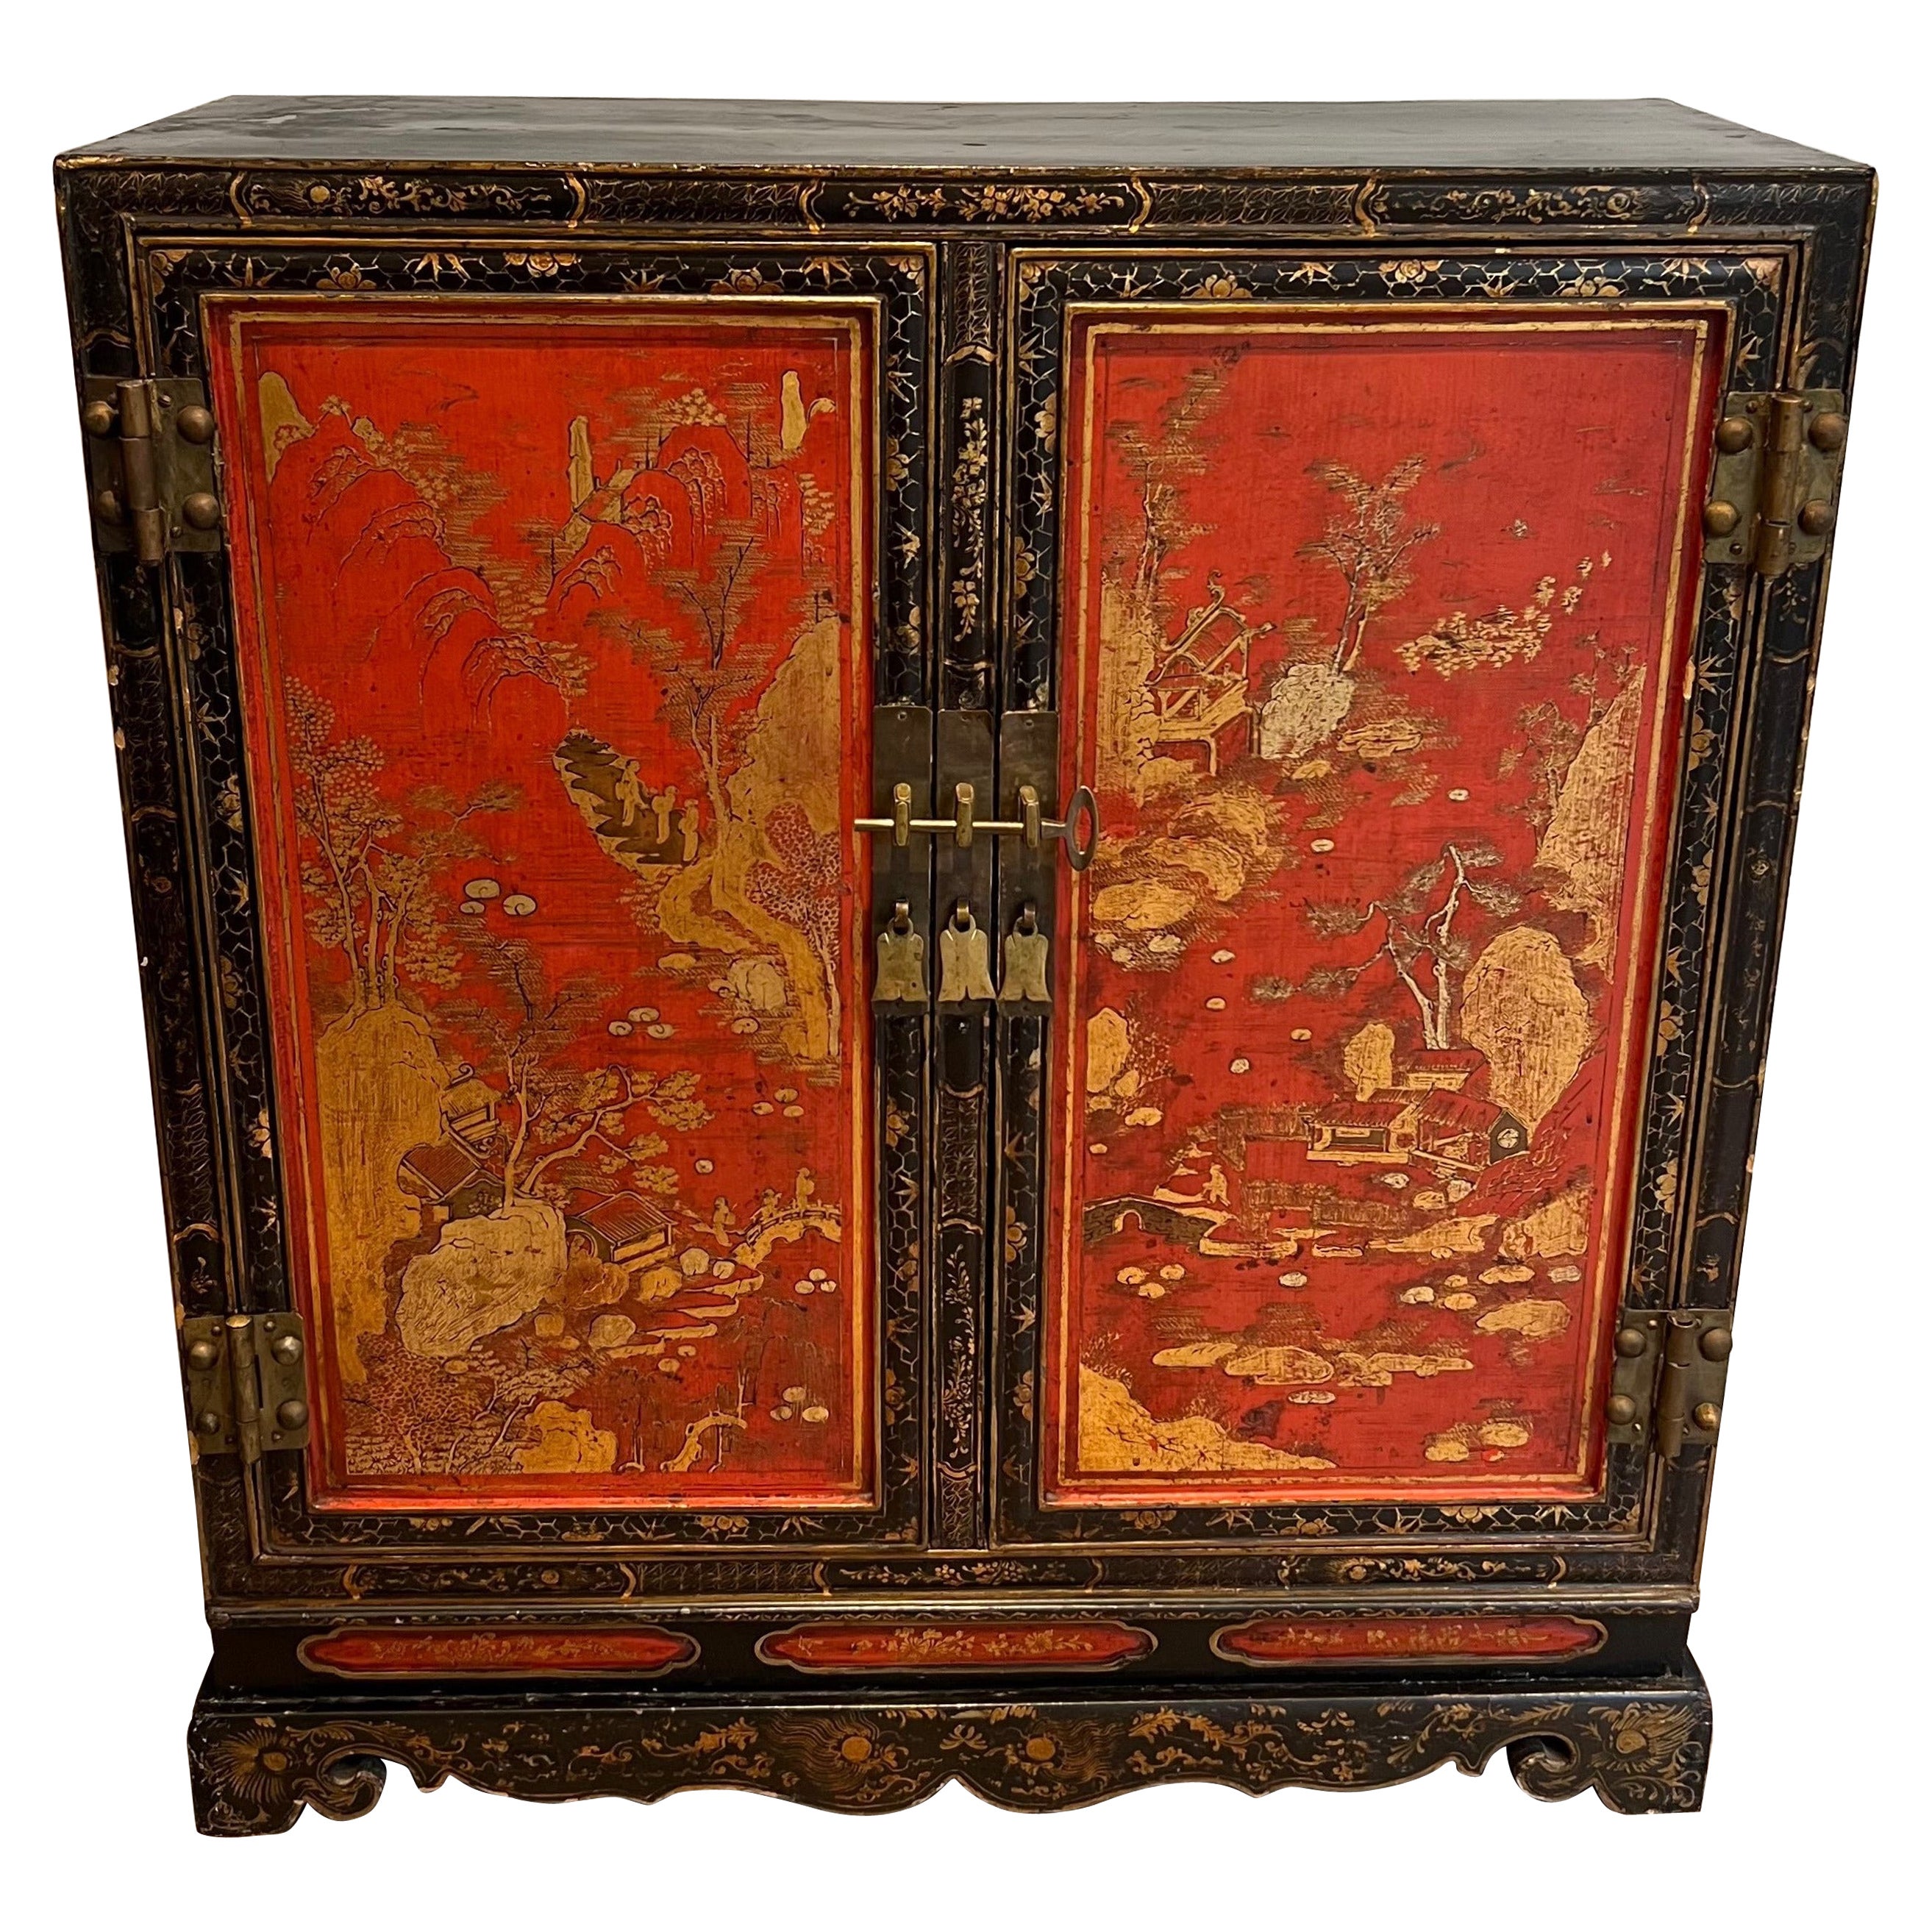 Lacquered Wood Cabinet with Chinese Seenes